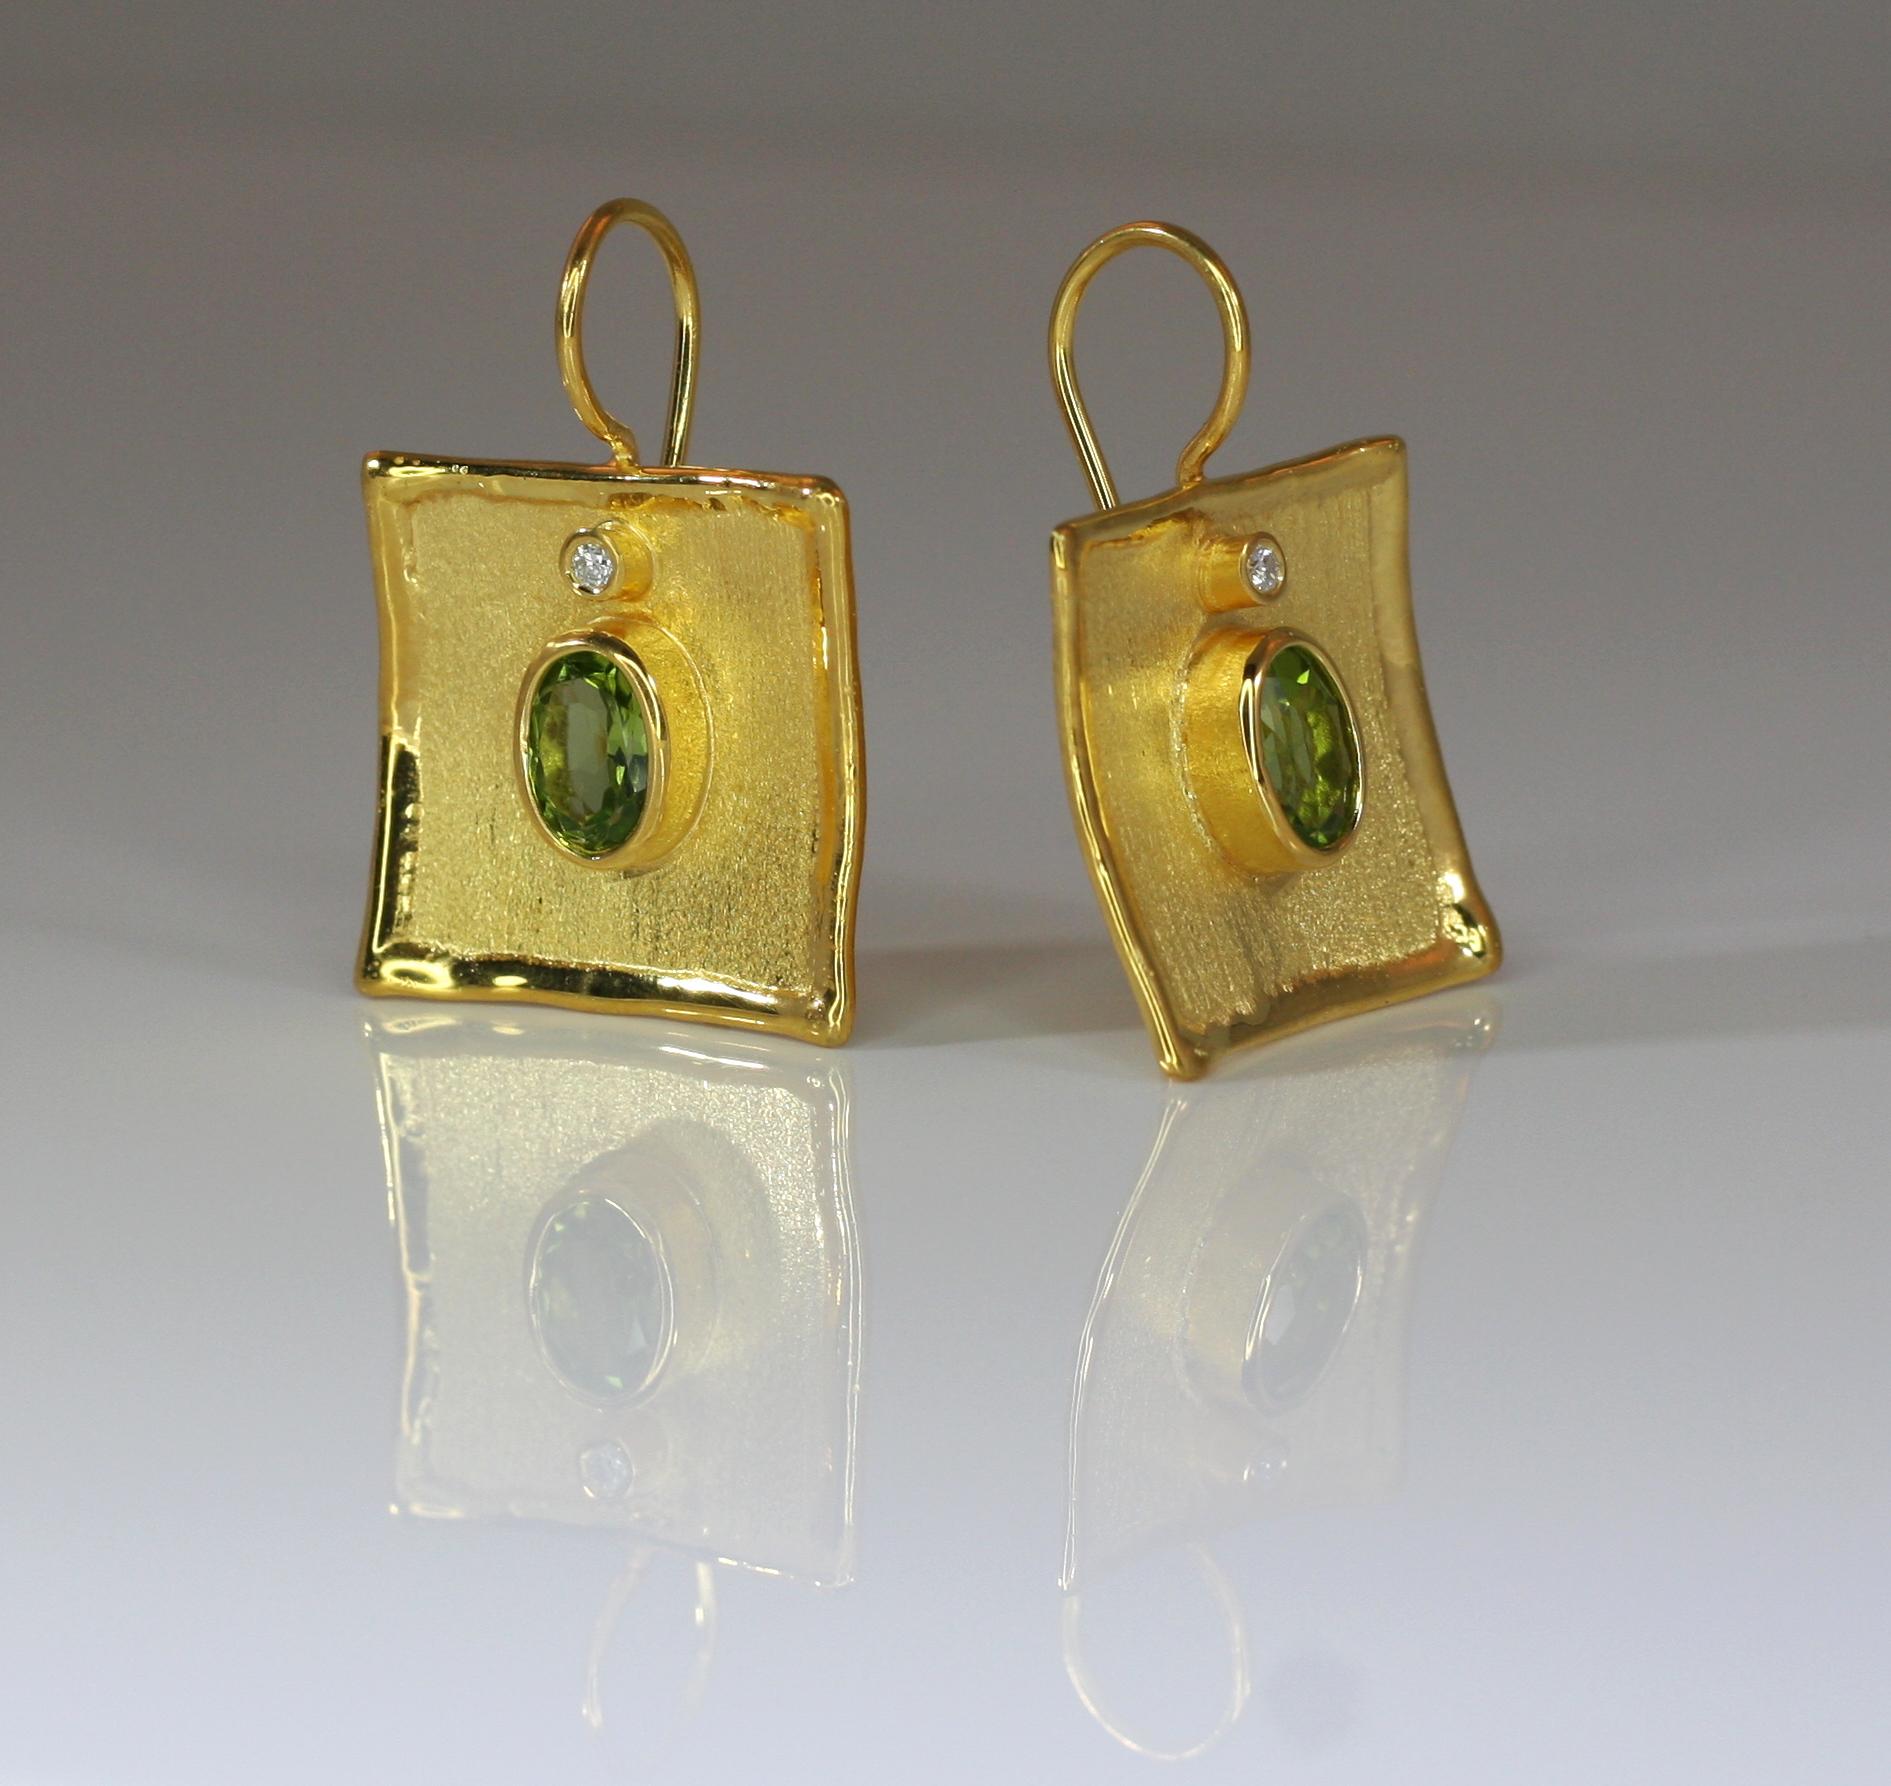 Yianni Creations 18 Karat Gold Earrings with 2.70 Carat Peridot and Diamonds In New Condition For Sale In Astoria, NY